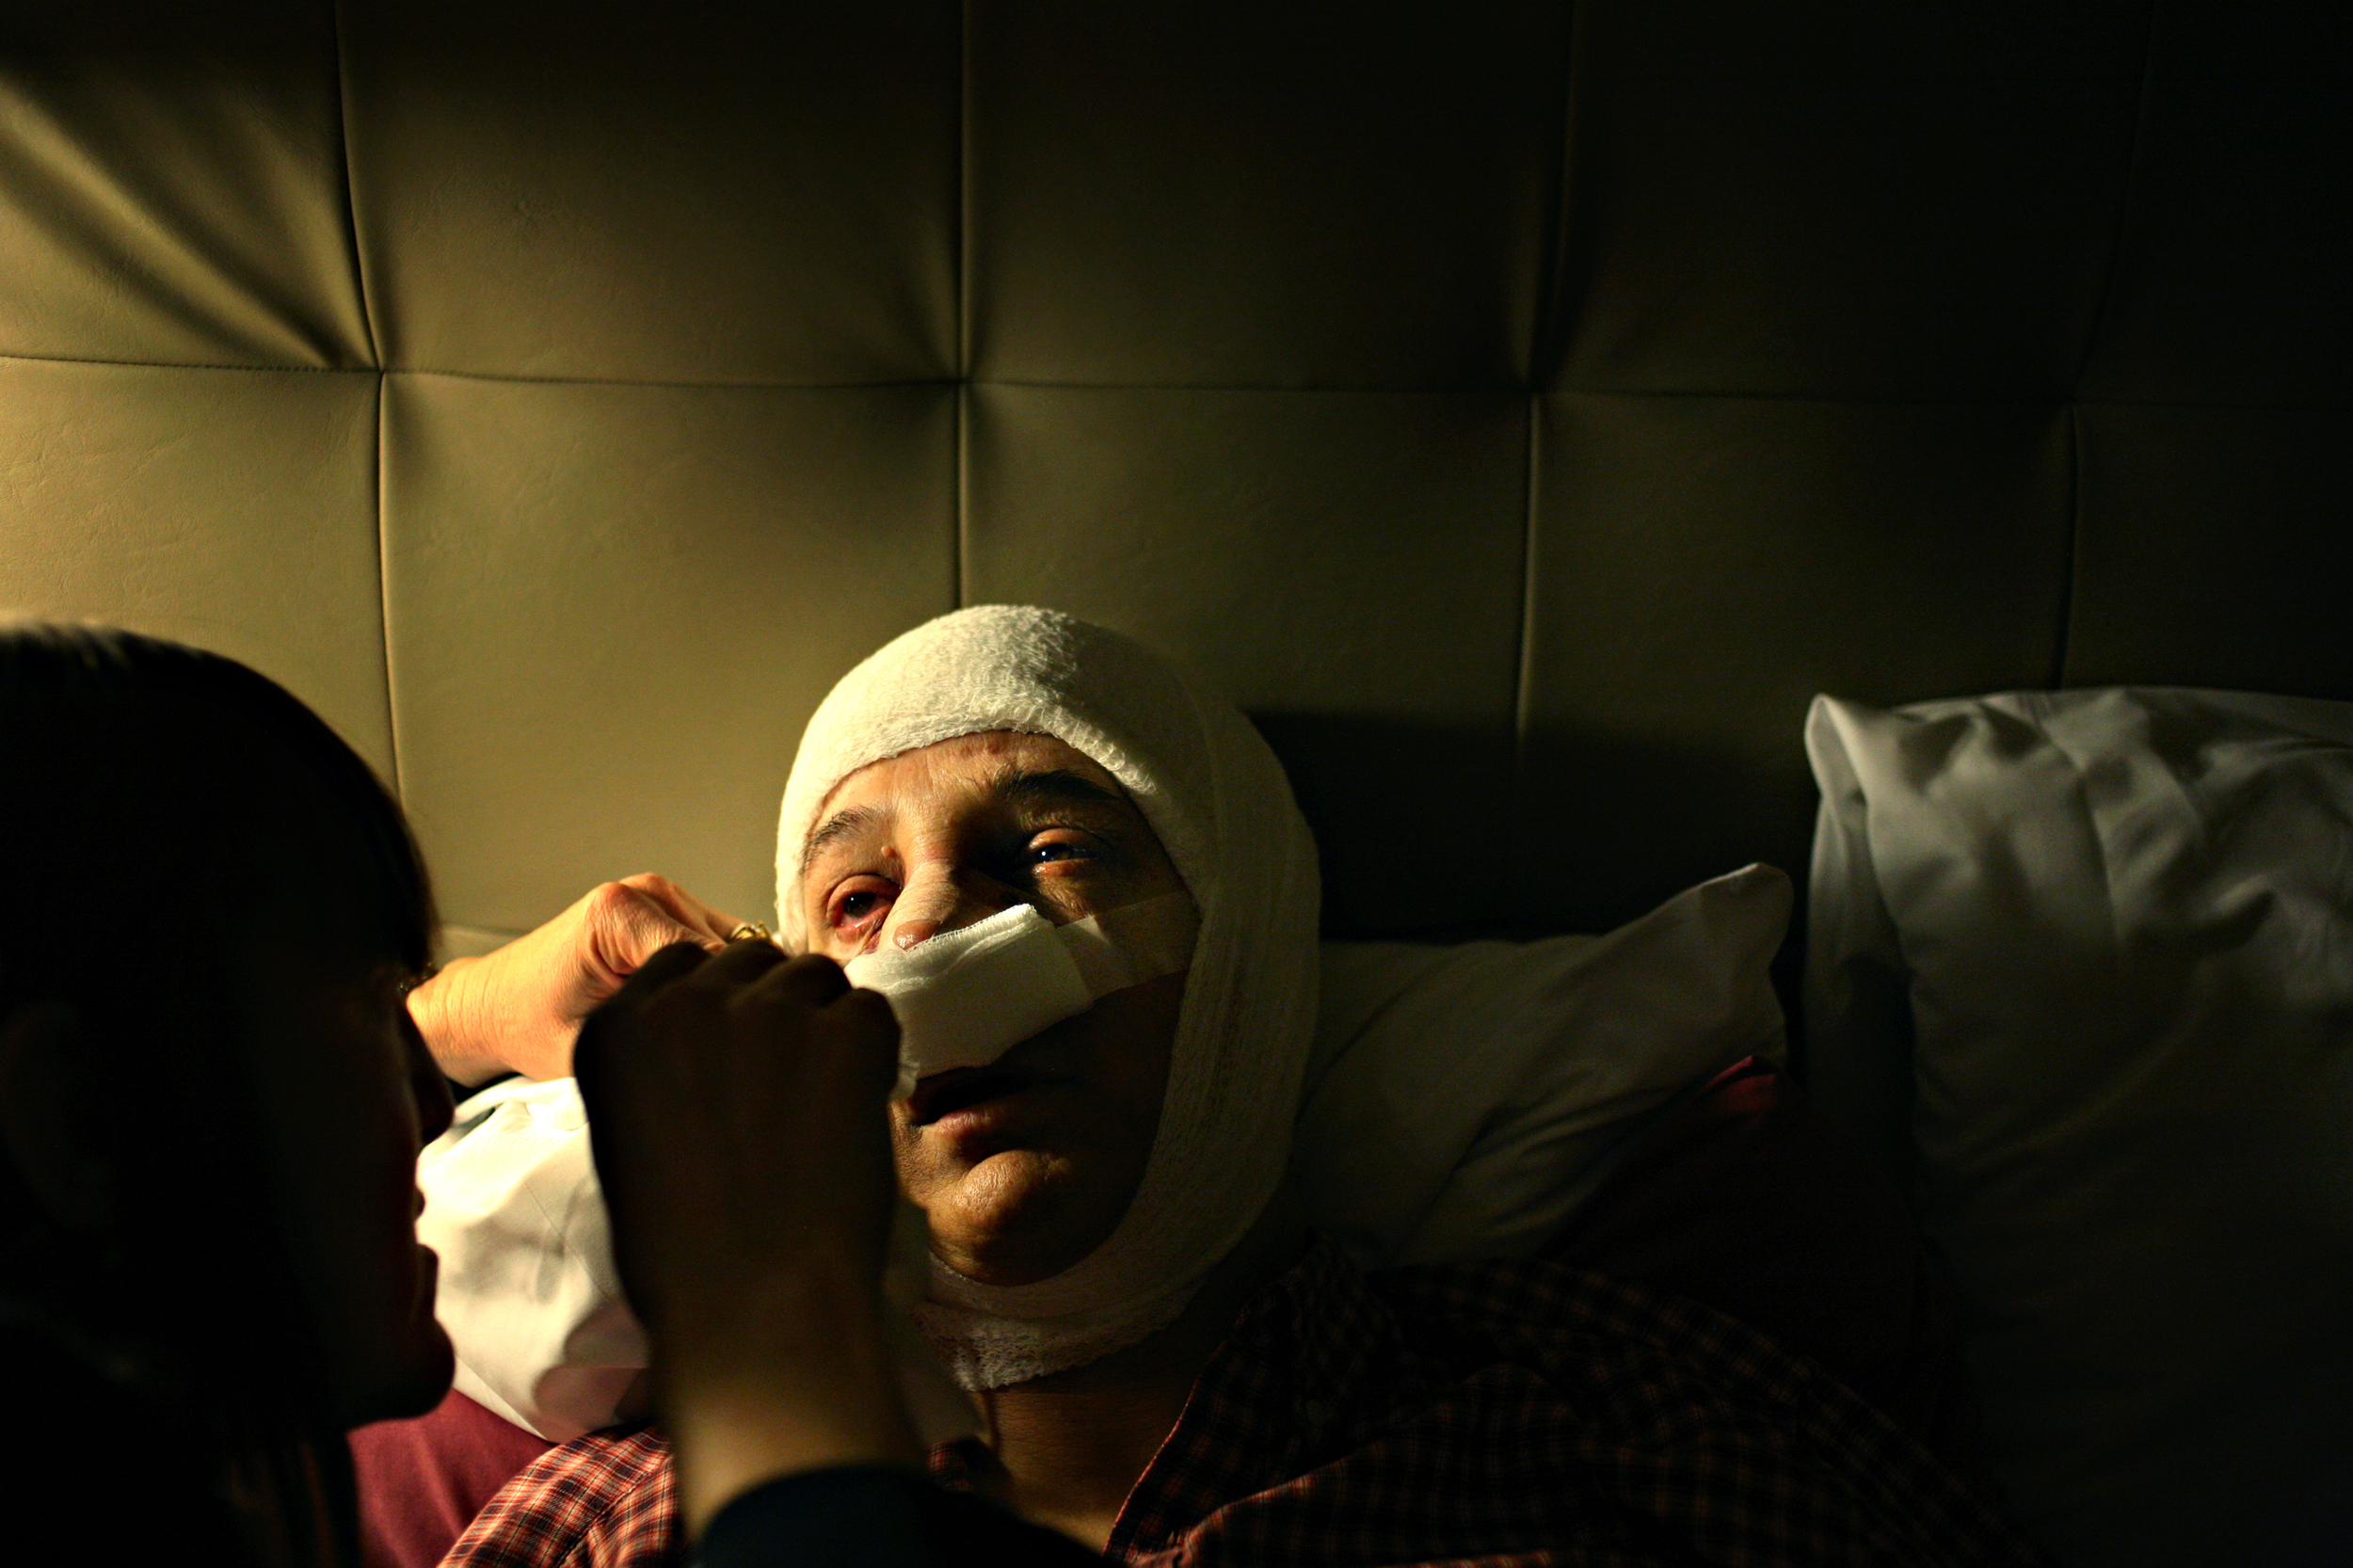  Elena tries to stay awake as her wife, Zing, changes her bandages after her facial feminization surgery.  In June 2008, Elena and Zing watched a movie,&nbsp; Ma Vie en Rose , about a Belgian boy coming to terms with his gender identity. The movie tr